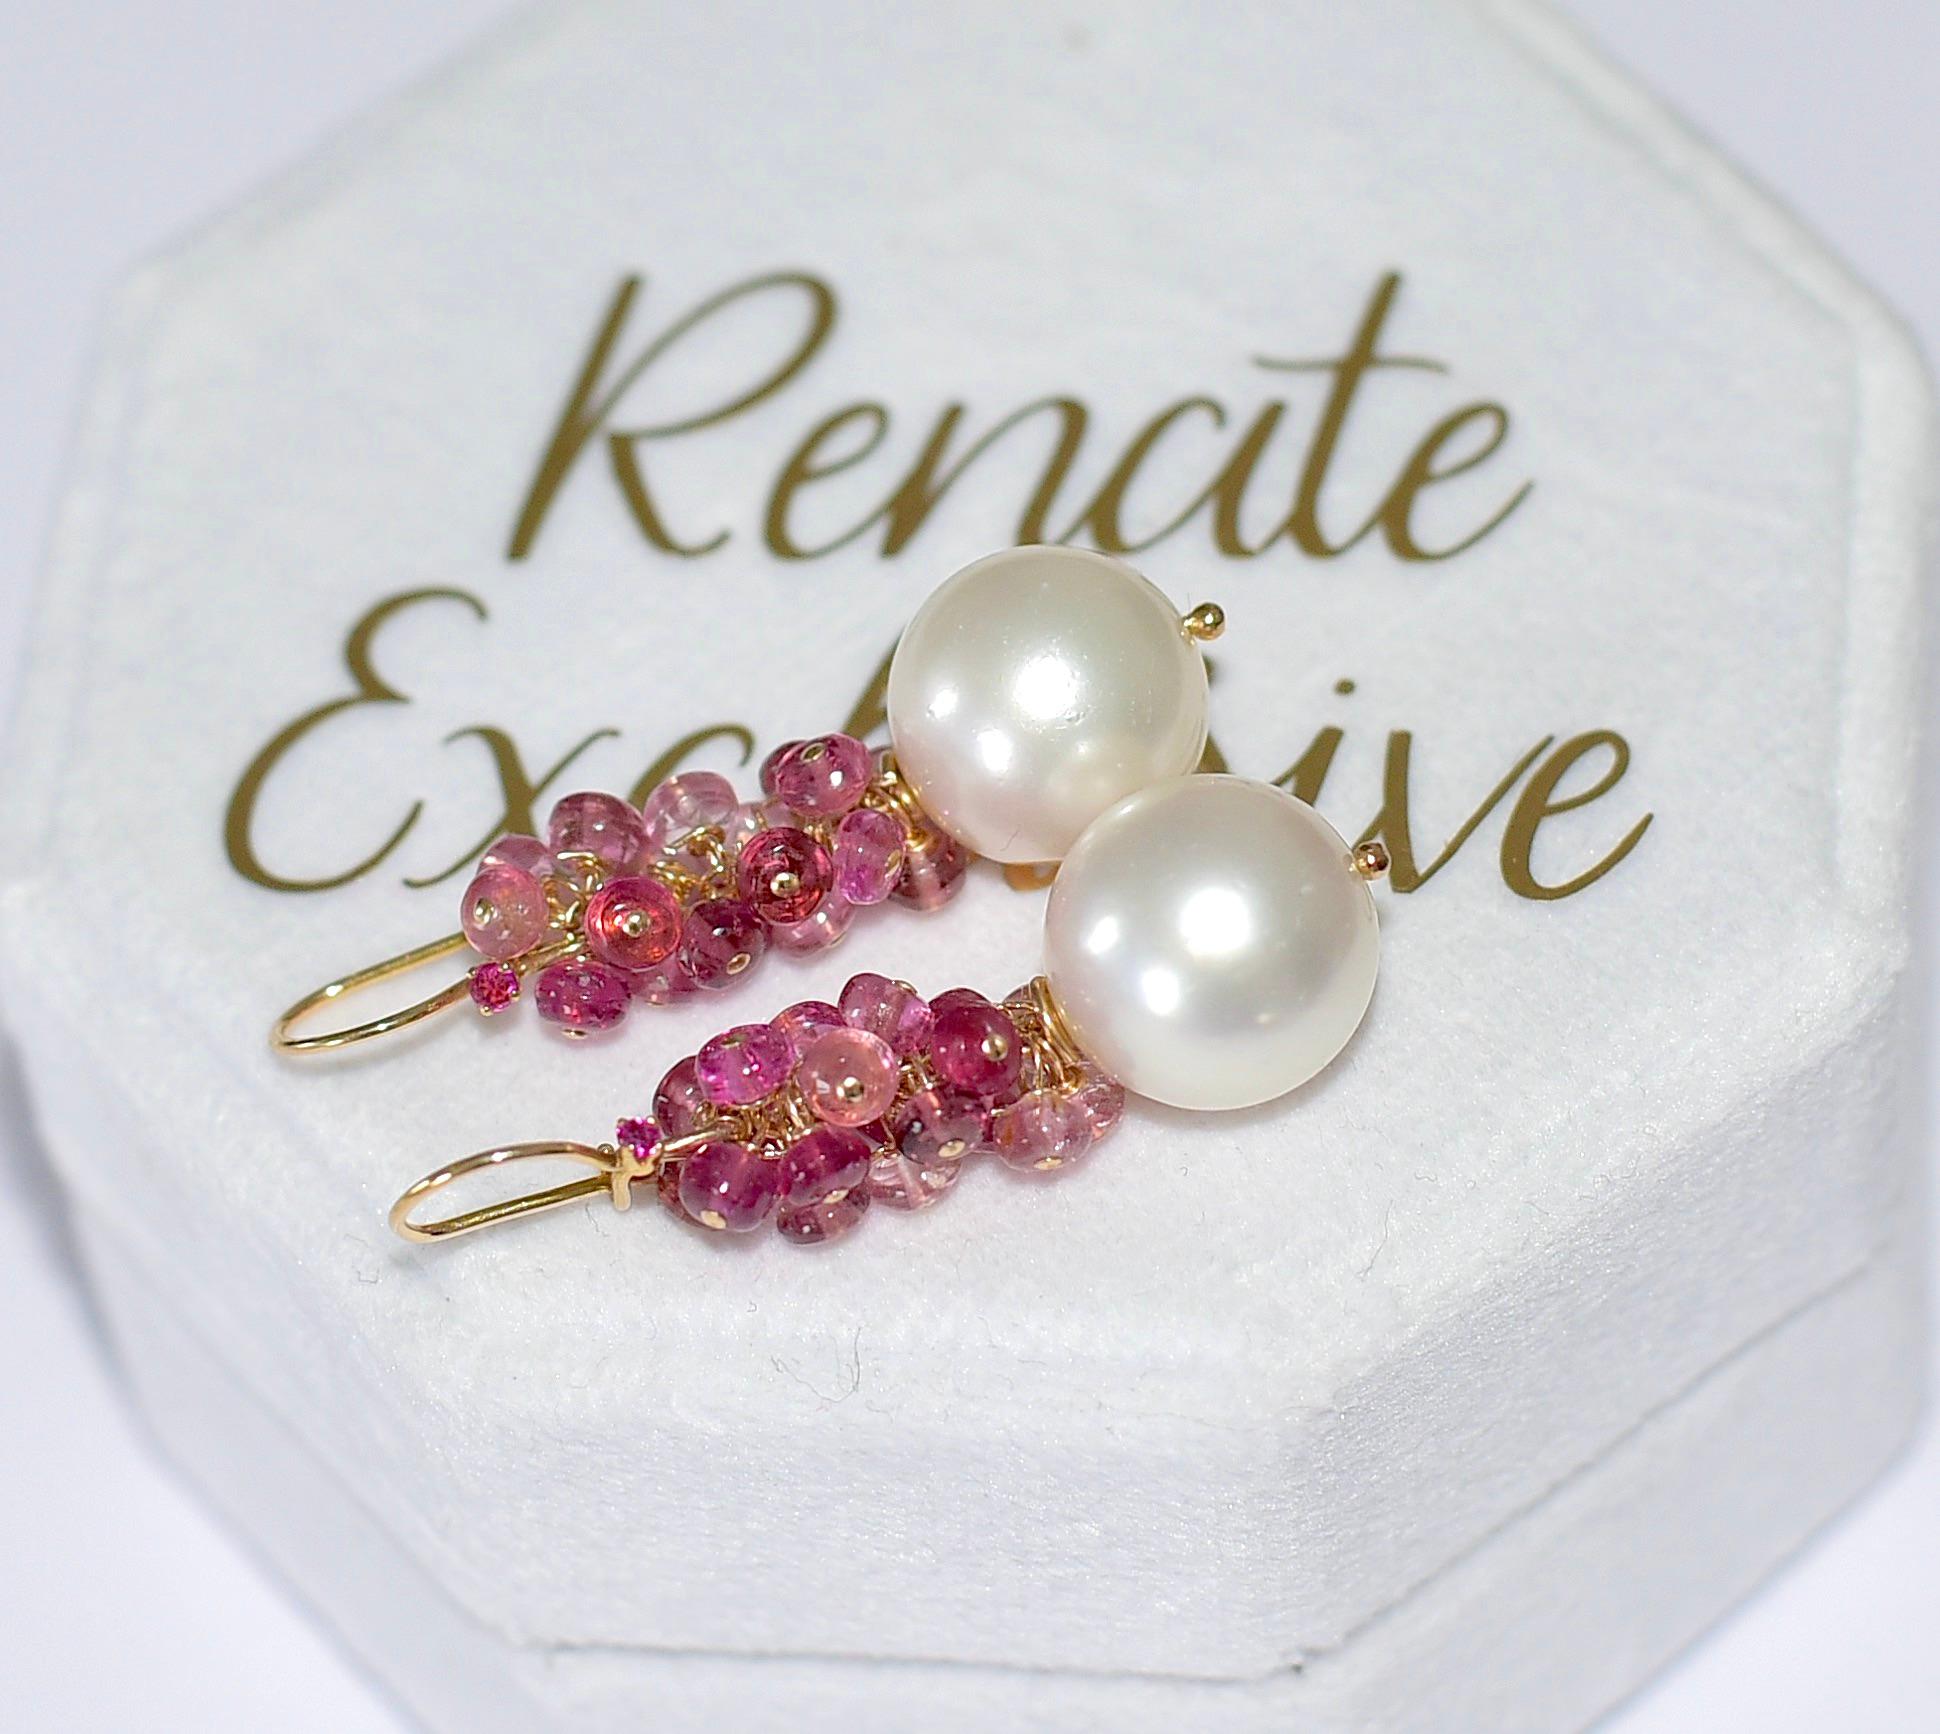 Lovely 13,5mm South Sea Pearl earrings with a touch of the deep color of a ruby! Decidedly elegant pearl earrings with Brazilian Rubelite Tourmaline beads. Elegant, artistic, and unique style!  Nobody has this! 
Earring 14K Solid Yellow Gold with